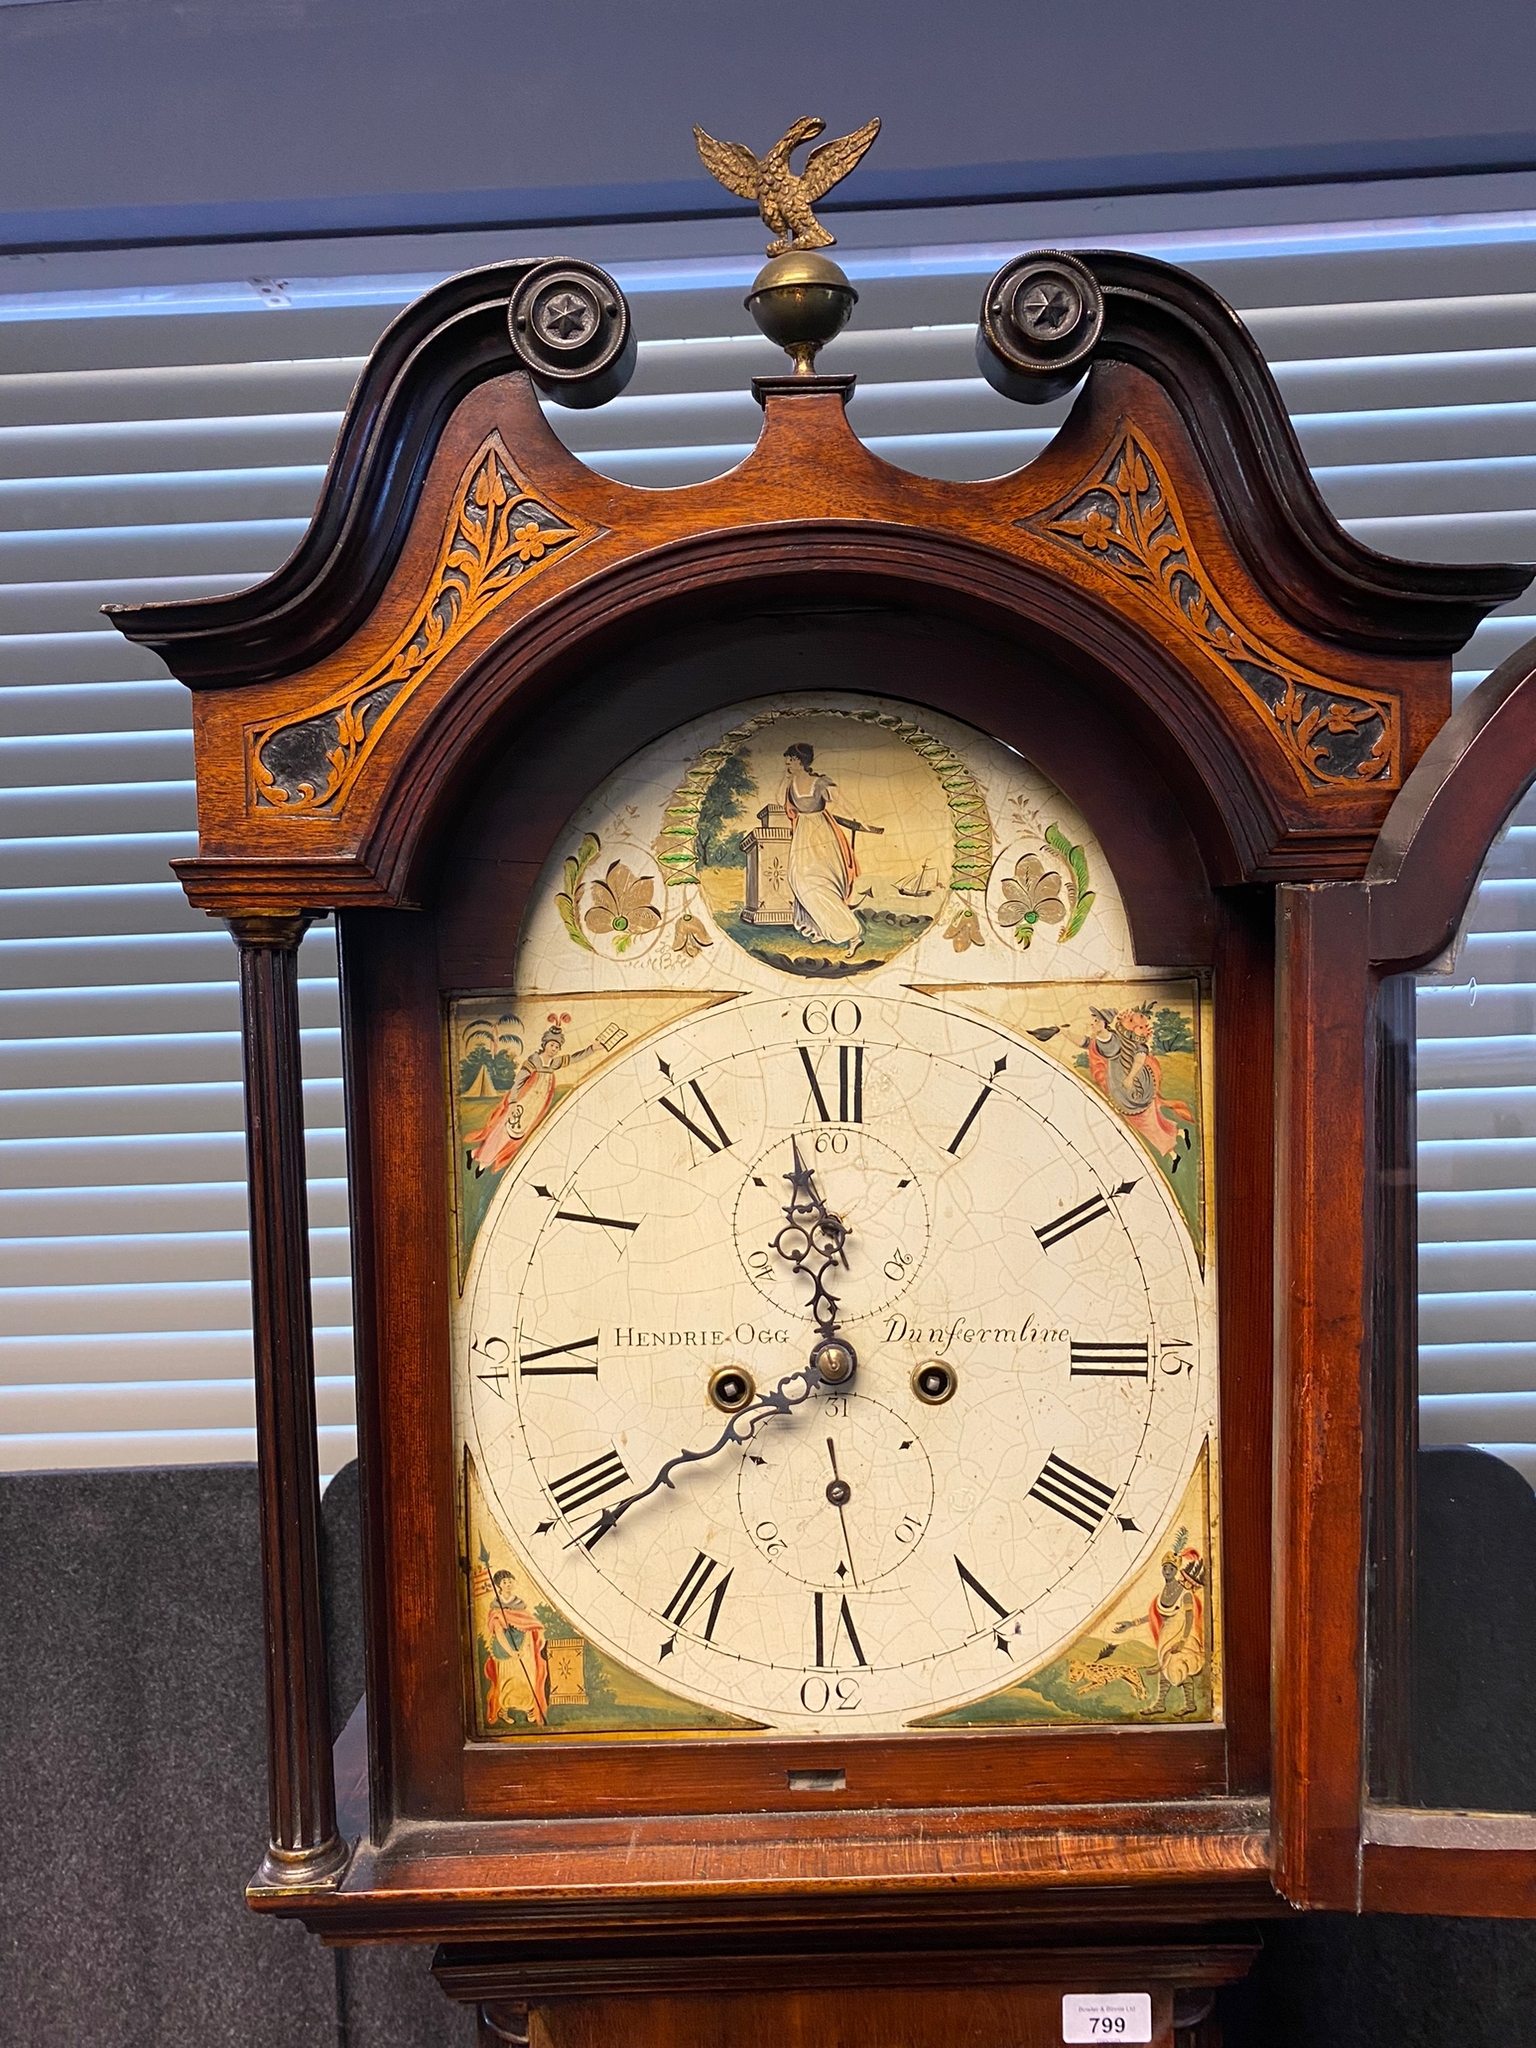 18th/ 19th century Dunfermline Grandfather clock with hand painted face depicting round cartouche - Image 11 of 12